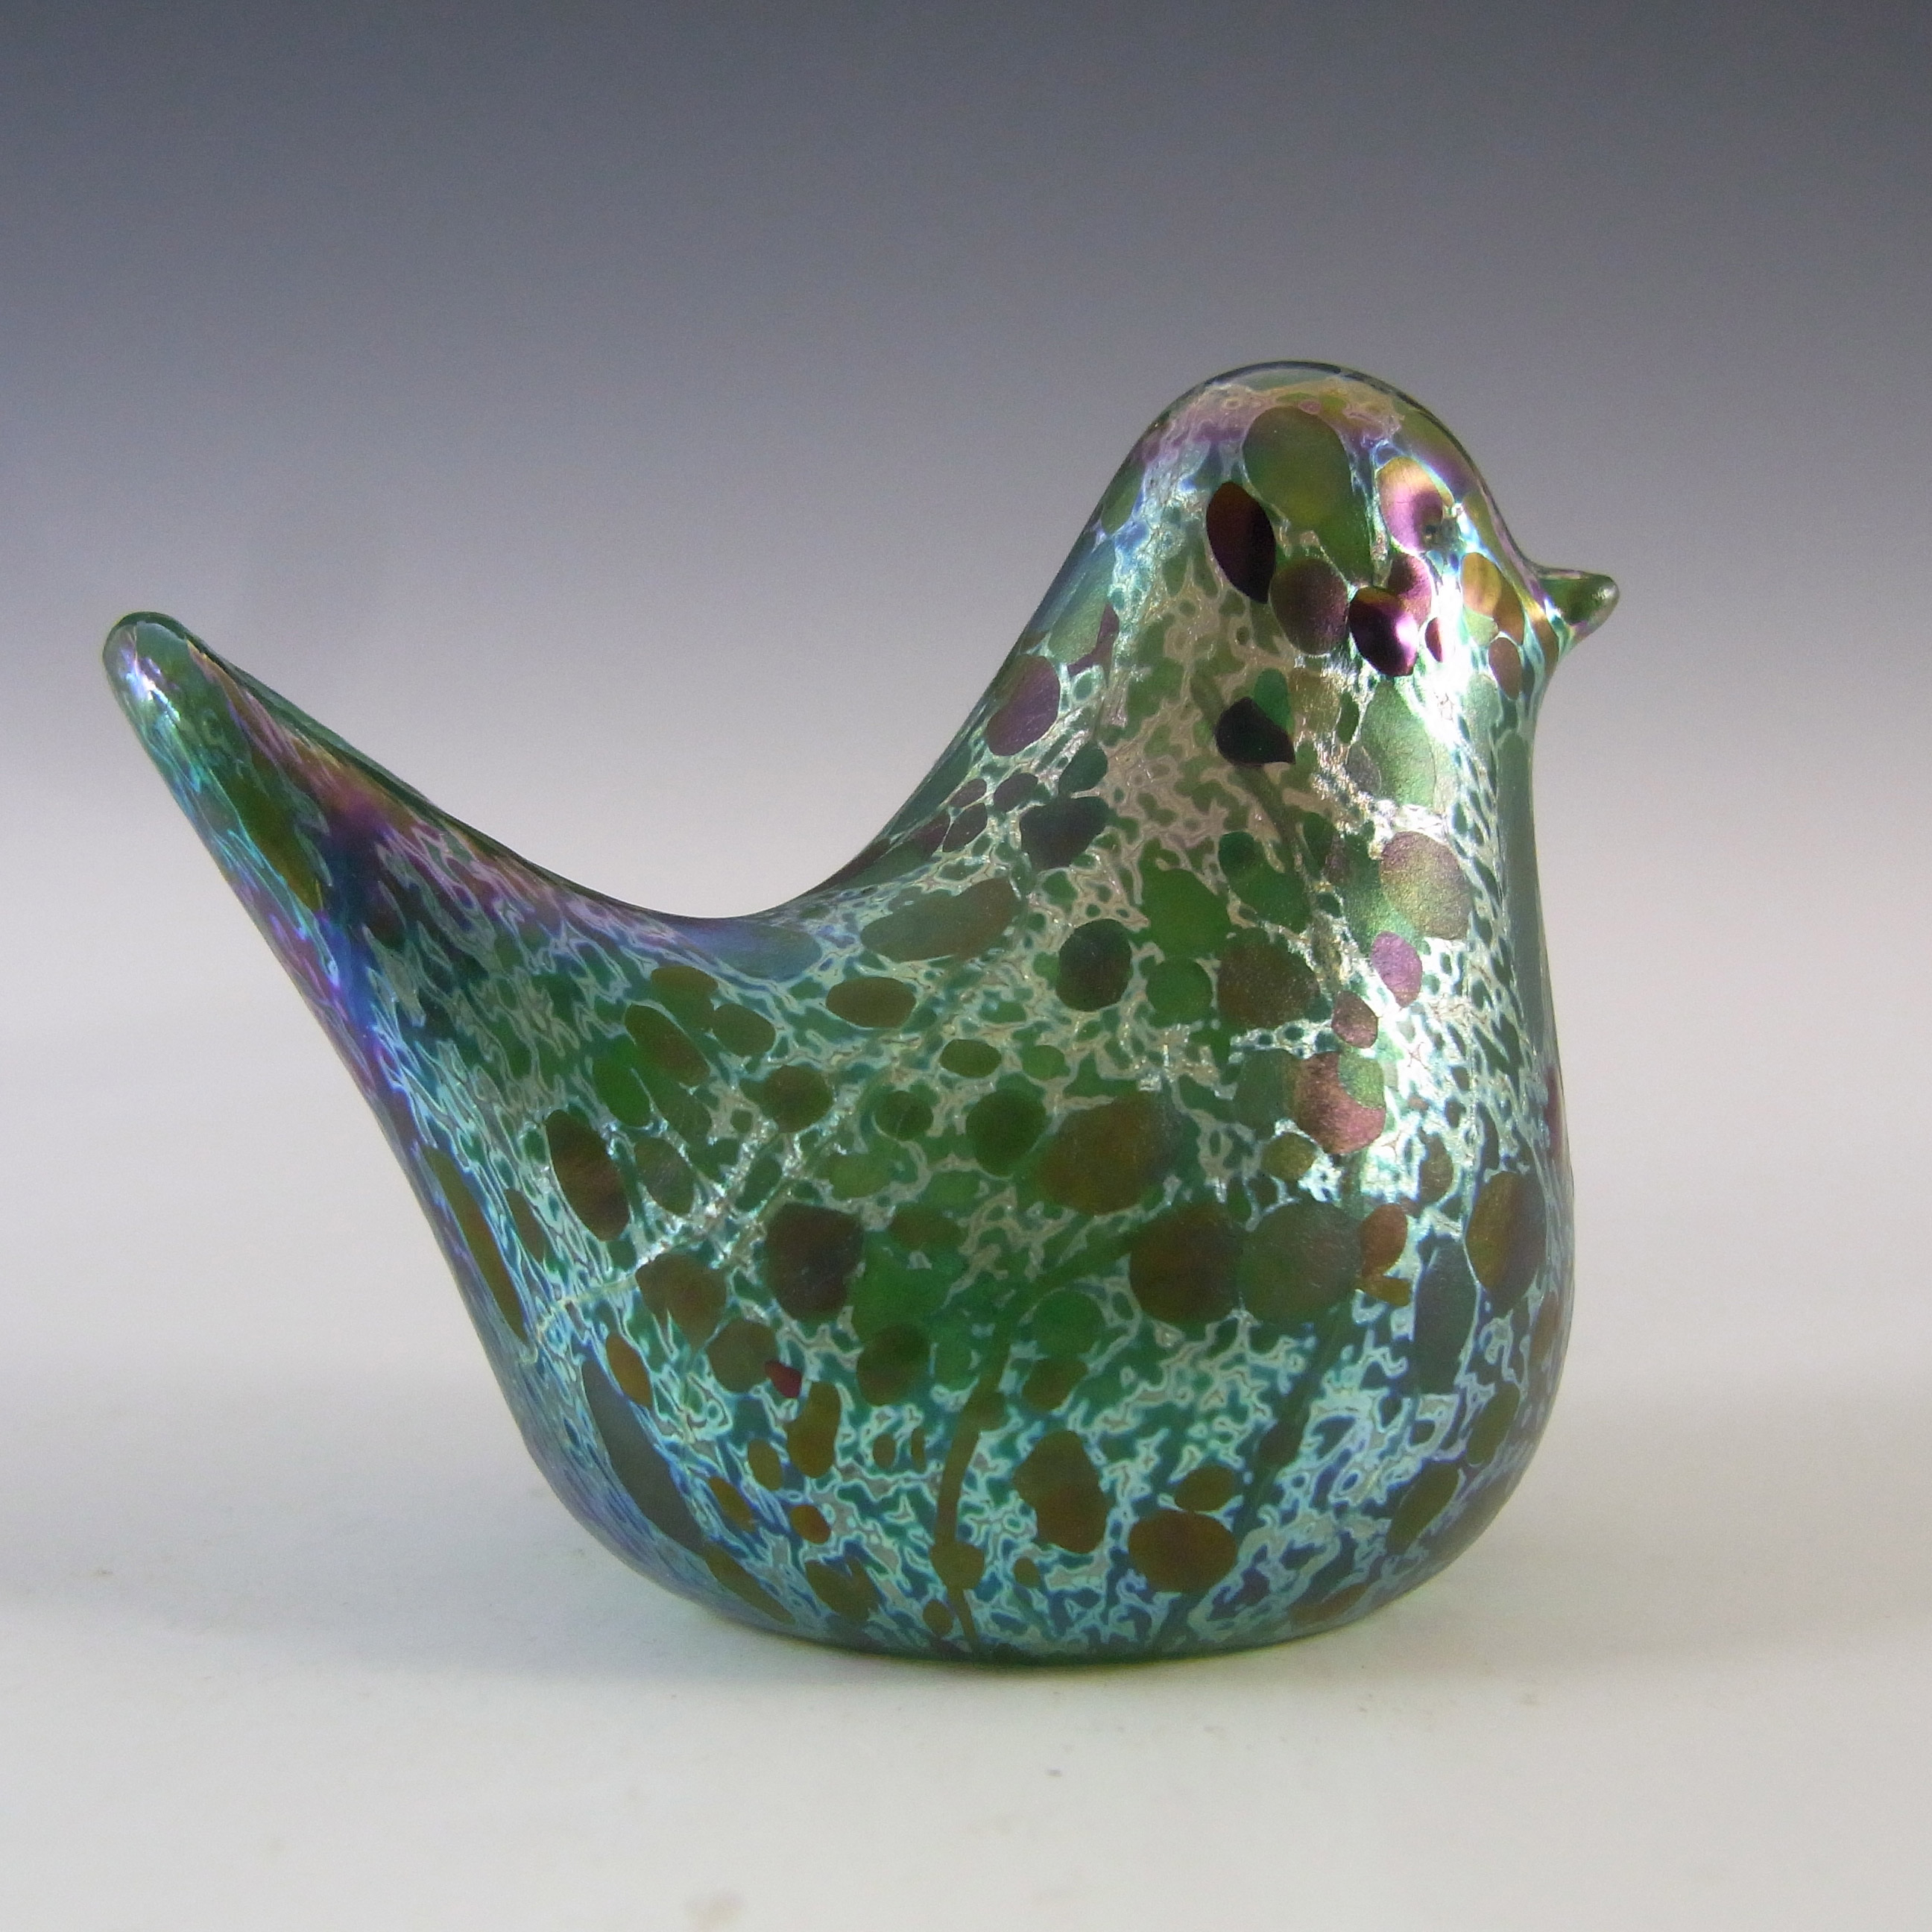 Isle of Wight Studio 'Summer Fruits' Greenberry Glass Bird - Click Image to Close